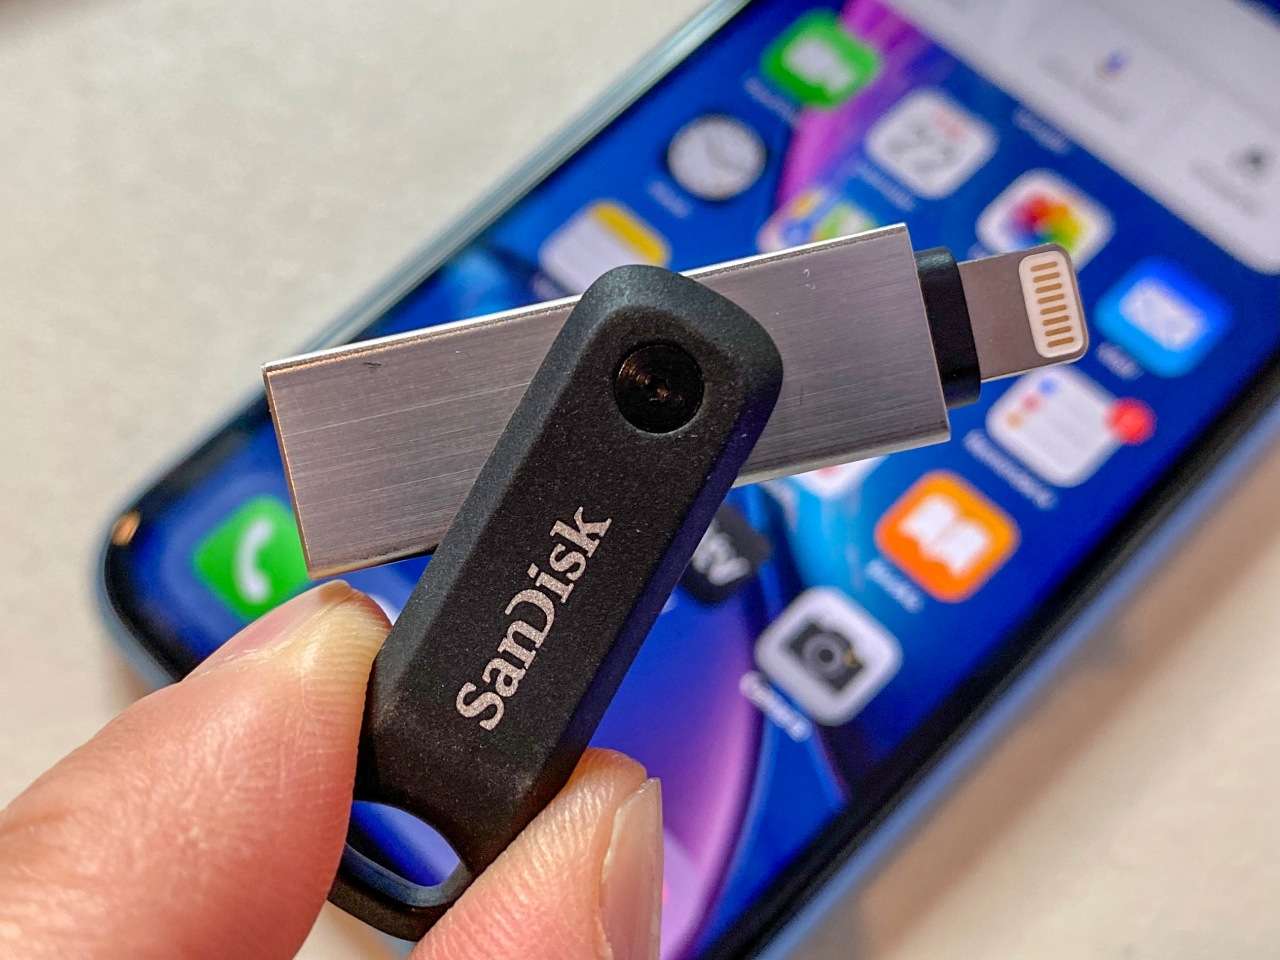 Plug this tiny flash drive into your iPhone to backup your photos ...